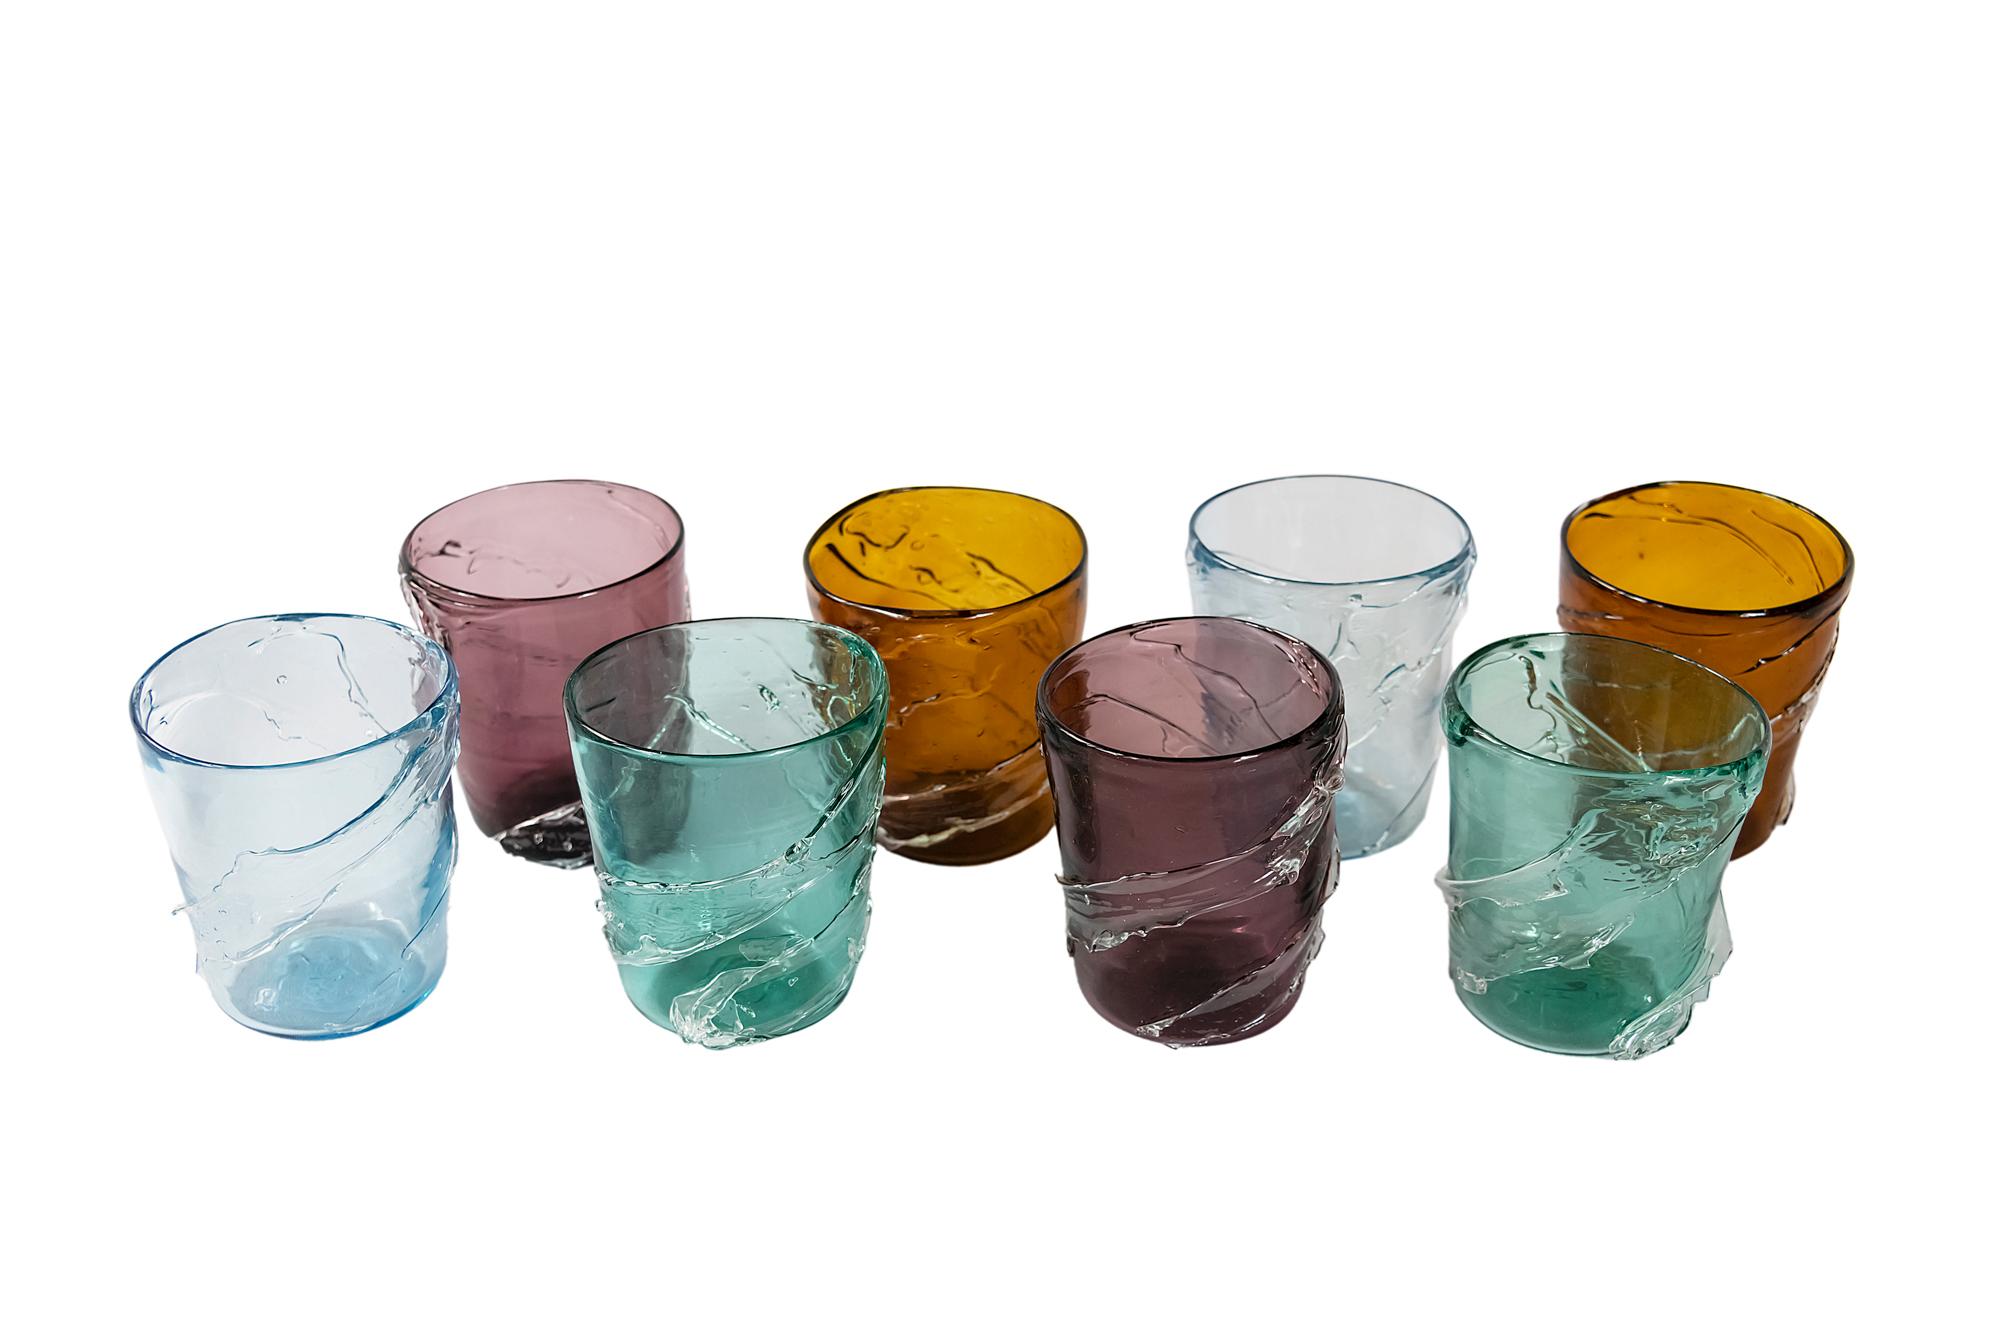 The set of 8 pcs. Italian handmade Murano glasses in different colors.
Very good condition.

